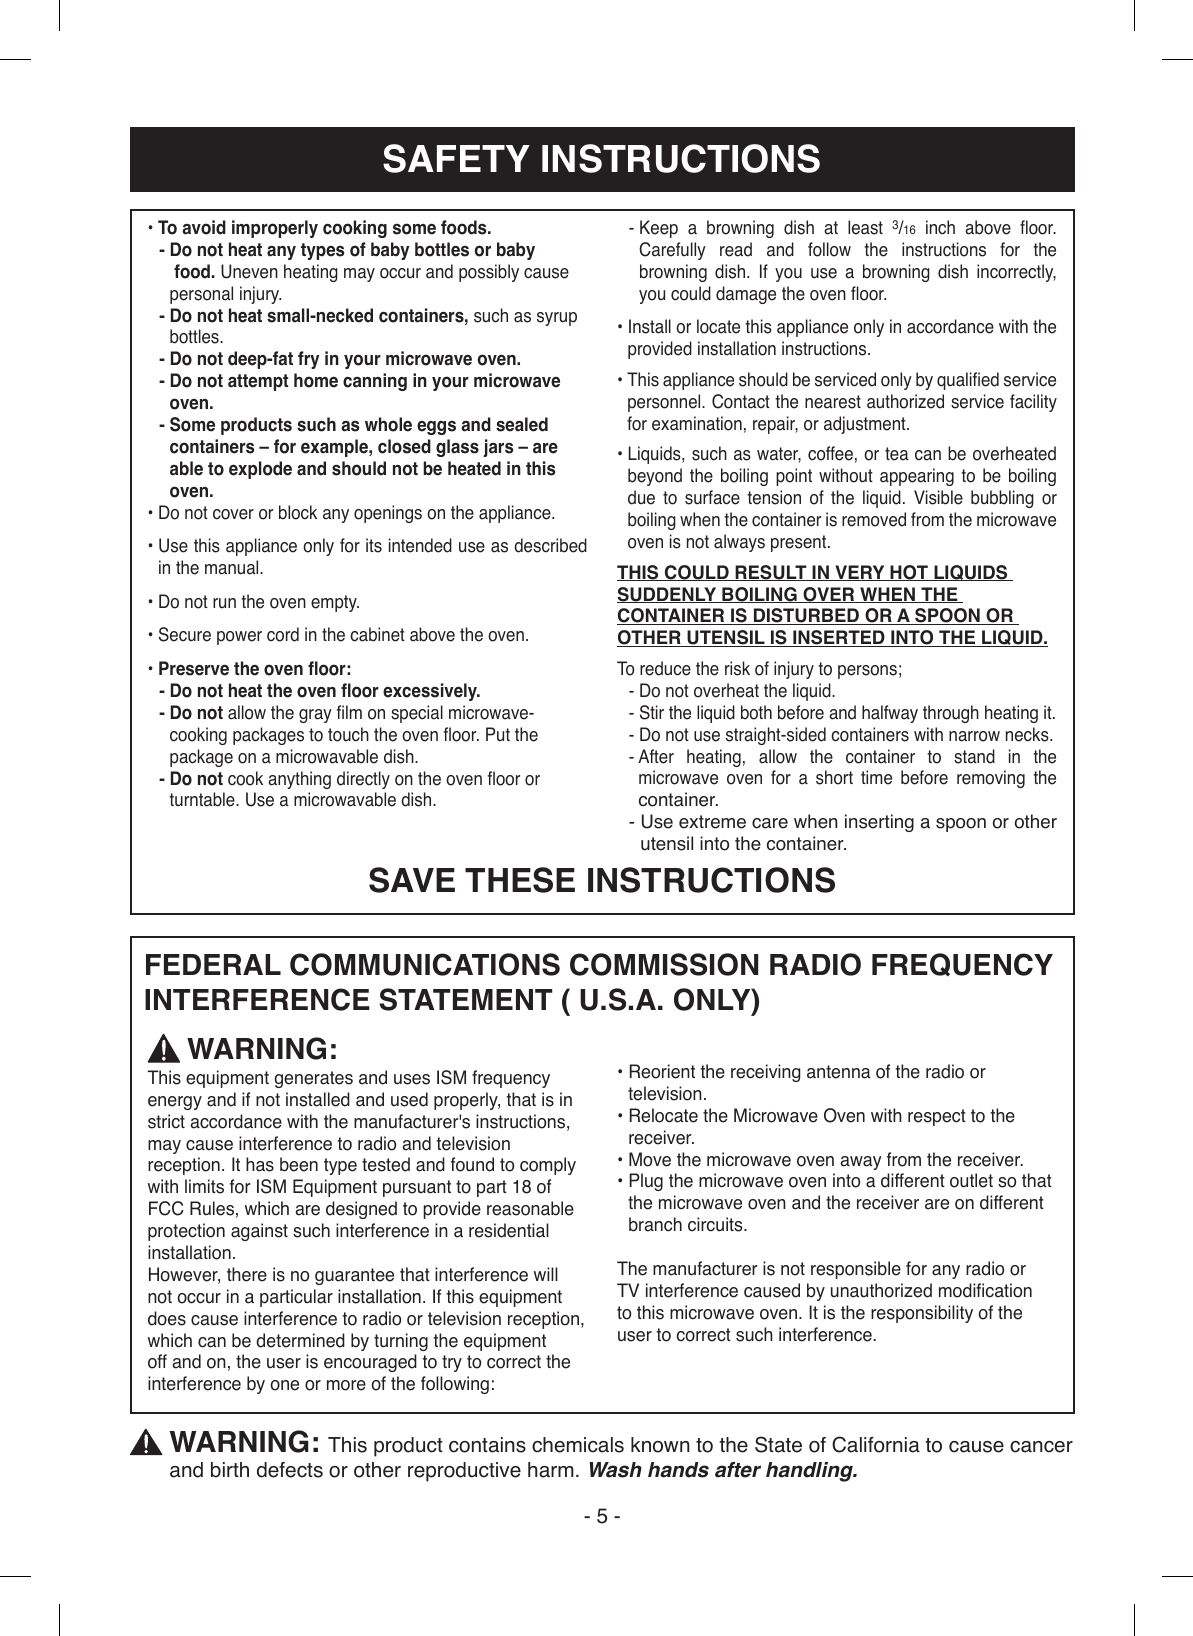 SAFETY INSTRUCTIONS- 5 -FEDERAL COMMUNICATIONS COMMISSION RADIO FREQUENCYINTERFERENCE STATEMENT ( U.S.A. ONLY)• To avoid improperly cooking some foods.-   Do not heat any types of baby bottles or baby  food. Uneven heating may occur and possibly cause personal injury.-  Do not heat small-necked containers, such as syrup bottles.- Do not deep-fat fry in your microwave oven.-  Do not attempt home canning in your microwave oven.-  Some products such as whole eggs and sealed containers – for example, closed glass jars – are able to explode and should not be heated in this oven.• Do not cover or block any openings on the appliance.•  Use this appliance only for its intended use as described  in the manual.• Do not run the oven empty.• Secure power cord in the cabinet above the oven.• Preserve the oven oor:- Do not heat the oven oor excessively.-  Do not allow the gray lm on special microwave-cooking packages to touch the oven oor. Put the package on a microwavable dish.-  Do not cook anything directly on the oven oor or turntable. Use a microwavable dish.-  Keep a browning dish at least 3/16  inch  above  oor. Carefully read and follow the instructions for the browning dish. If you use a browning dish incorrectly, you could damage the oven oor.•  Install or locate this appliance only in accordance with the provided installation instructions.•  This appliance should be serviced only by qualied service personnel. Contact the nearest authorized service facility for examination, repair, or adjustment.•  Liquids, such as water, coffee, or tea can be overheated beyond the boiling point without appearing to be boiling due to surface tension of the liquid. Visible bubbling or boiling when the container is removed from the microwave oven is not always present.THIS COULD RESULT IN VERY HOT LIQUIDS SUDDENLY BOILING OVER WHEN THE CONTAINER IS DISTURBED OR A SPOON OR OTHER UTENSIL IS INSERTED INTO THE LIQUID.To reduce the risk of injury to persons;- Do not overheat the liquid.-  Stir the liquid both before and halfway through heating it.- Do not use straight-sided containers with narrow necks.-  After heating, allow the container to stand in the microwave oven for a short time before removing the container.-  Use extreme care when inserting a spoon or other utensil into the container. WARNING:This equipment generates and uses ISM frequency energy and if not installed and used properly, that is in strict accordance with the manufacturer&apos;s instructions, may cause interference to radio and television reception. It has been type tested and found to comply with limits for ISM Equipment pursuant to part 18 of FCC Rules, which are designed to provide reasonable protection against such interference in a residential installation.However, there is no guarantee that interference will not occur in a particular installation. If this equipment does cause interference to radio or television reception, which can be determined by turning the equipment off and on, the user is encouraged to try to correct the interference by one or more of the following:•  Reorient the receiving antenna of the radio or television.•  Relocate the Microwave Oven with respect to the receiver.• Move the microwave oven away from the receiver.•  Plug the microwave oven into a different outlet so that the microwave oven and the receiver are on different branch circuits.The manufacturer is not responsible for any radio orTV interference caused by unauthorized modicationto this microwave oven. It is the responsibility of theuser to correct such interference.  WARNING: This product contains chemicals known to the State of California to cause cancer and birth defects or other reproductive harm. Wash hands after handling.SAVE THESE INSTRUCTIONS